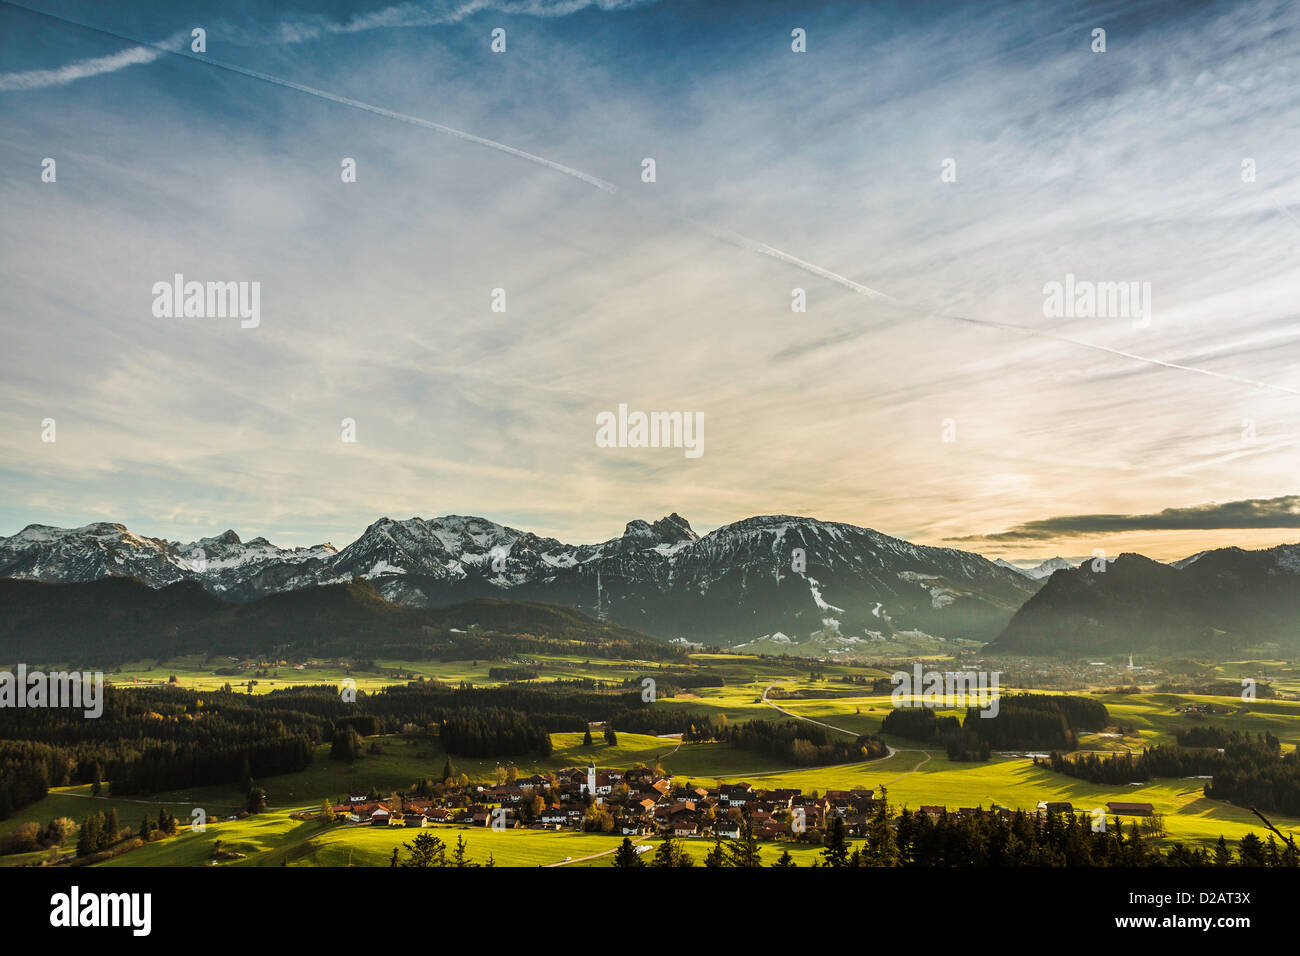 Aerial view of village and mountains Stock Photo